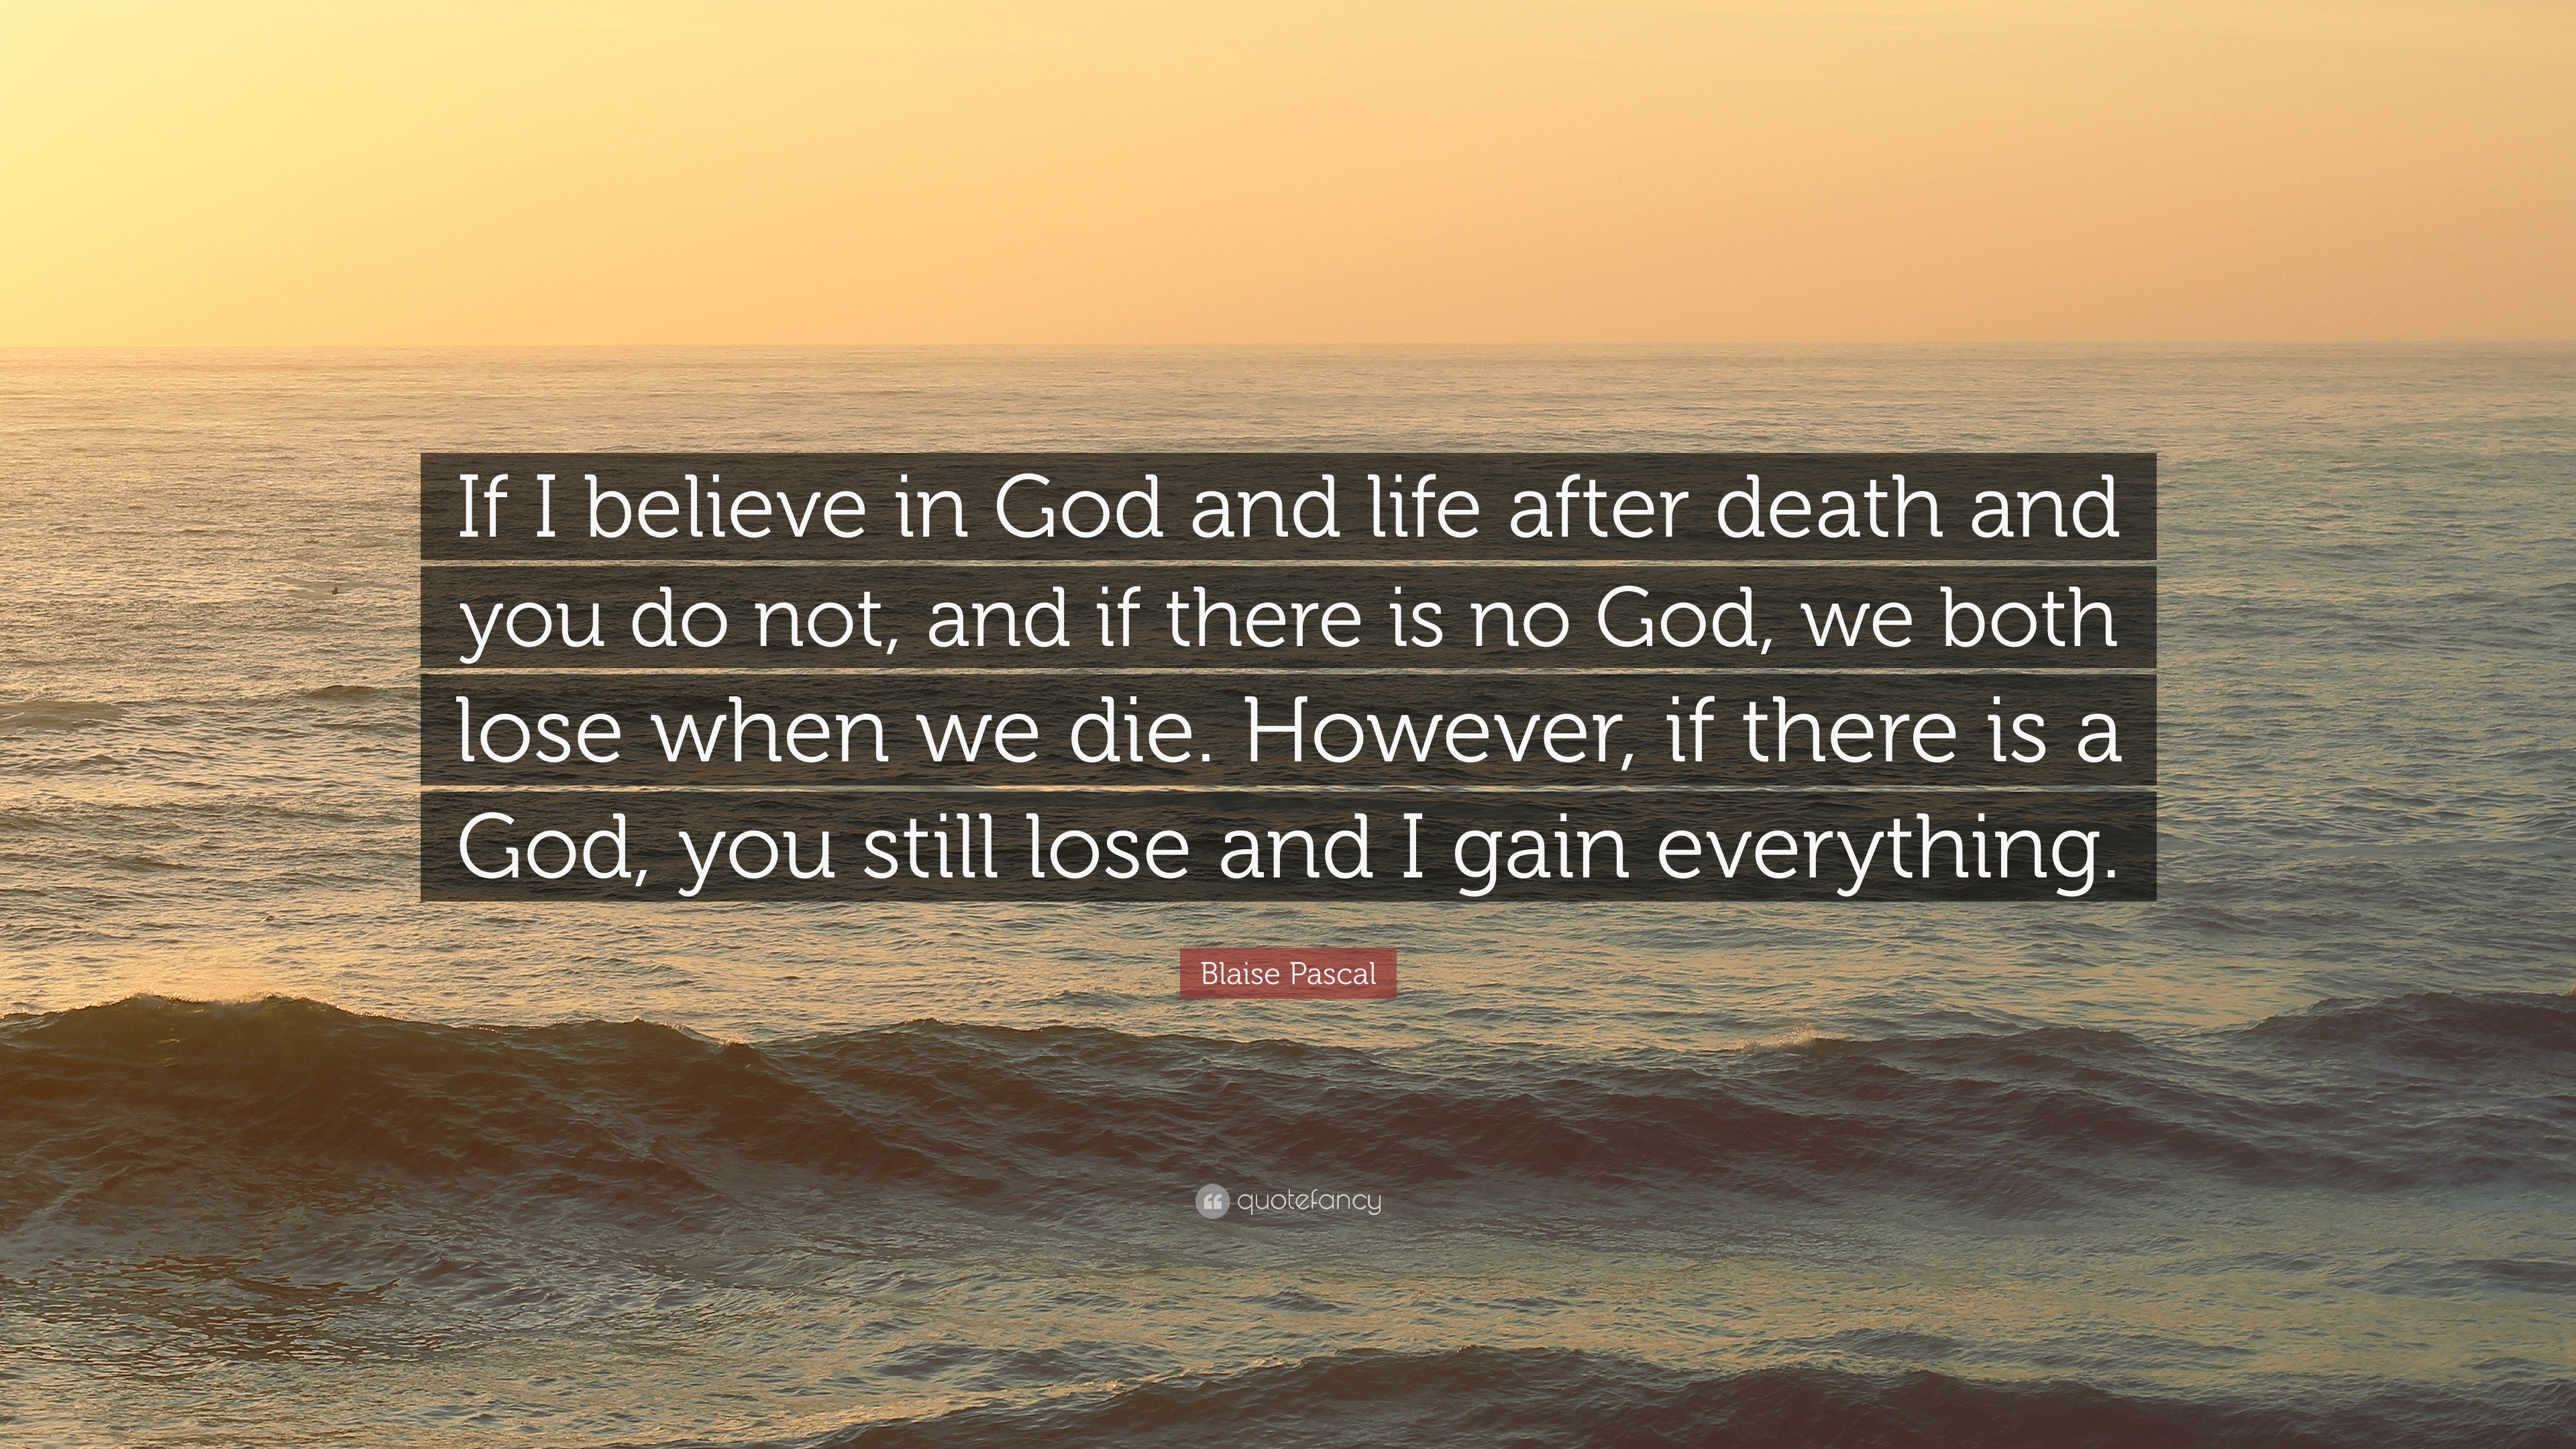 Blaise Pascal Quote “If I believe in God and life after and you